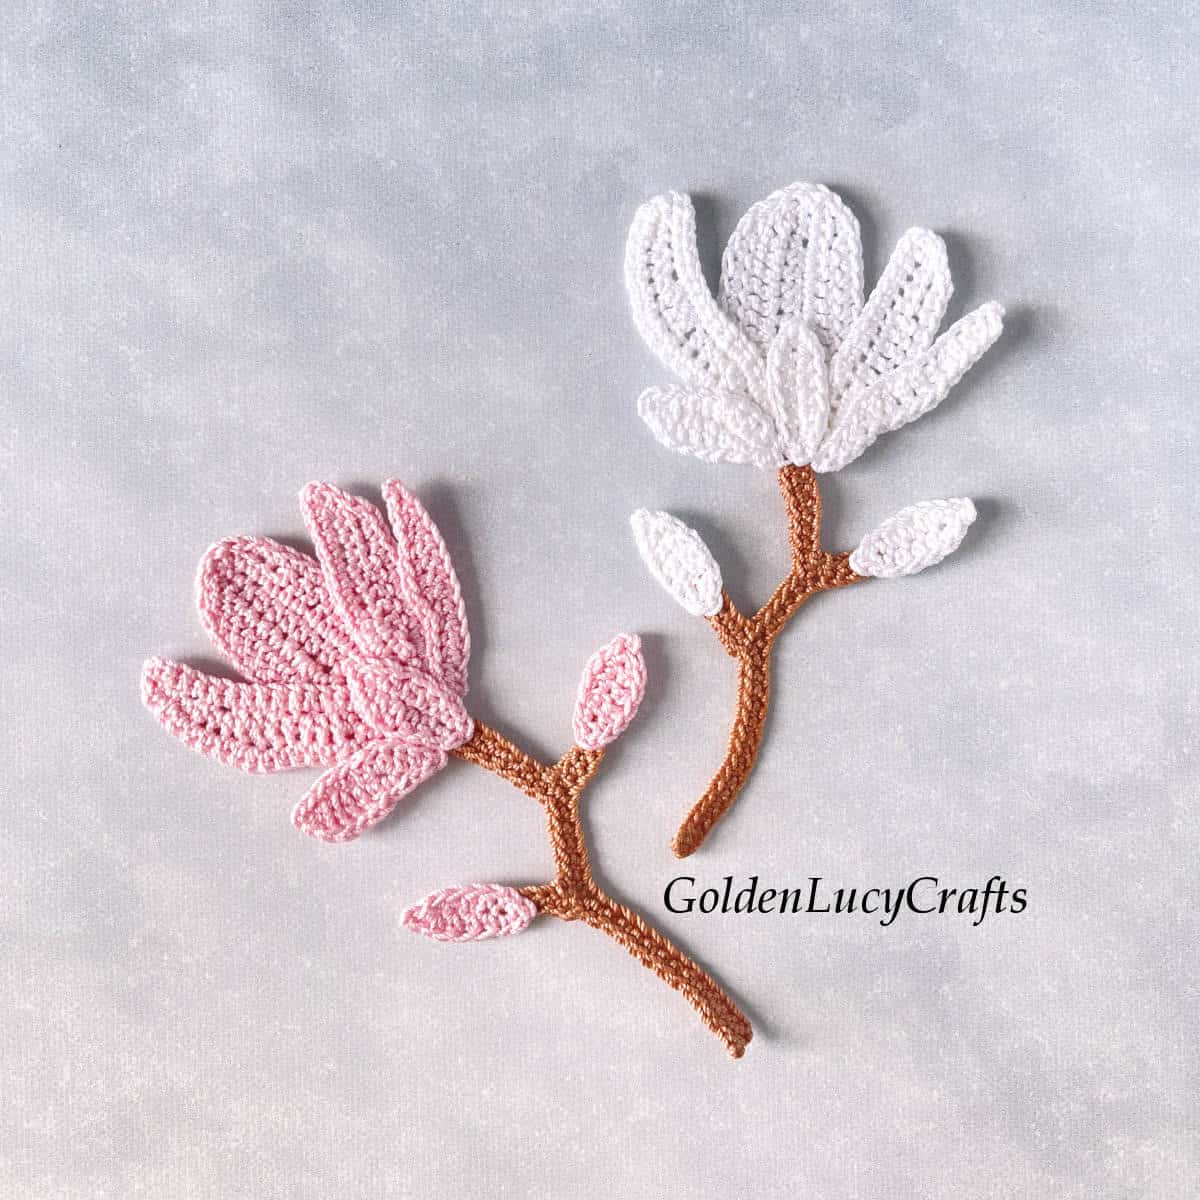 White and pink crocheted magnolia appliques.